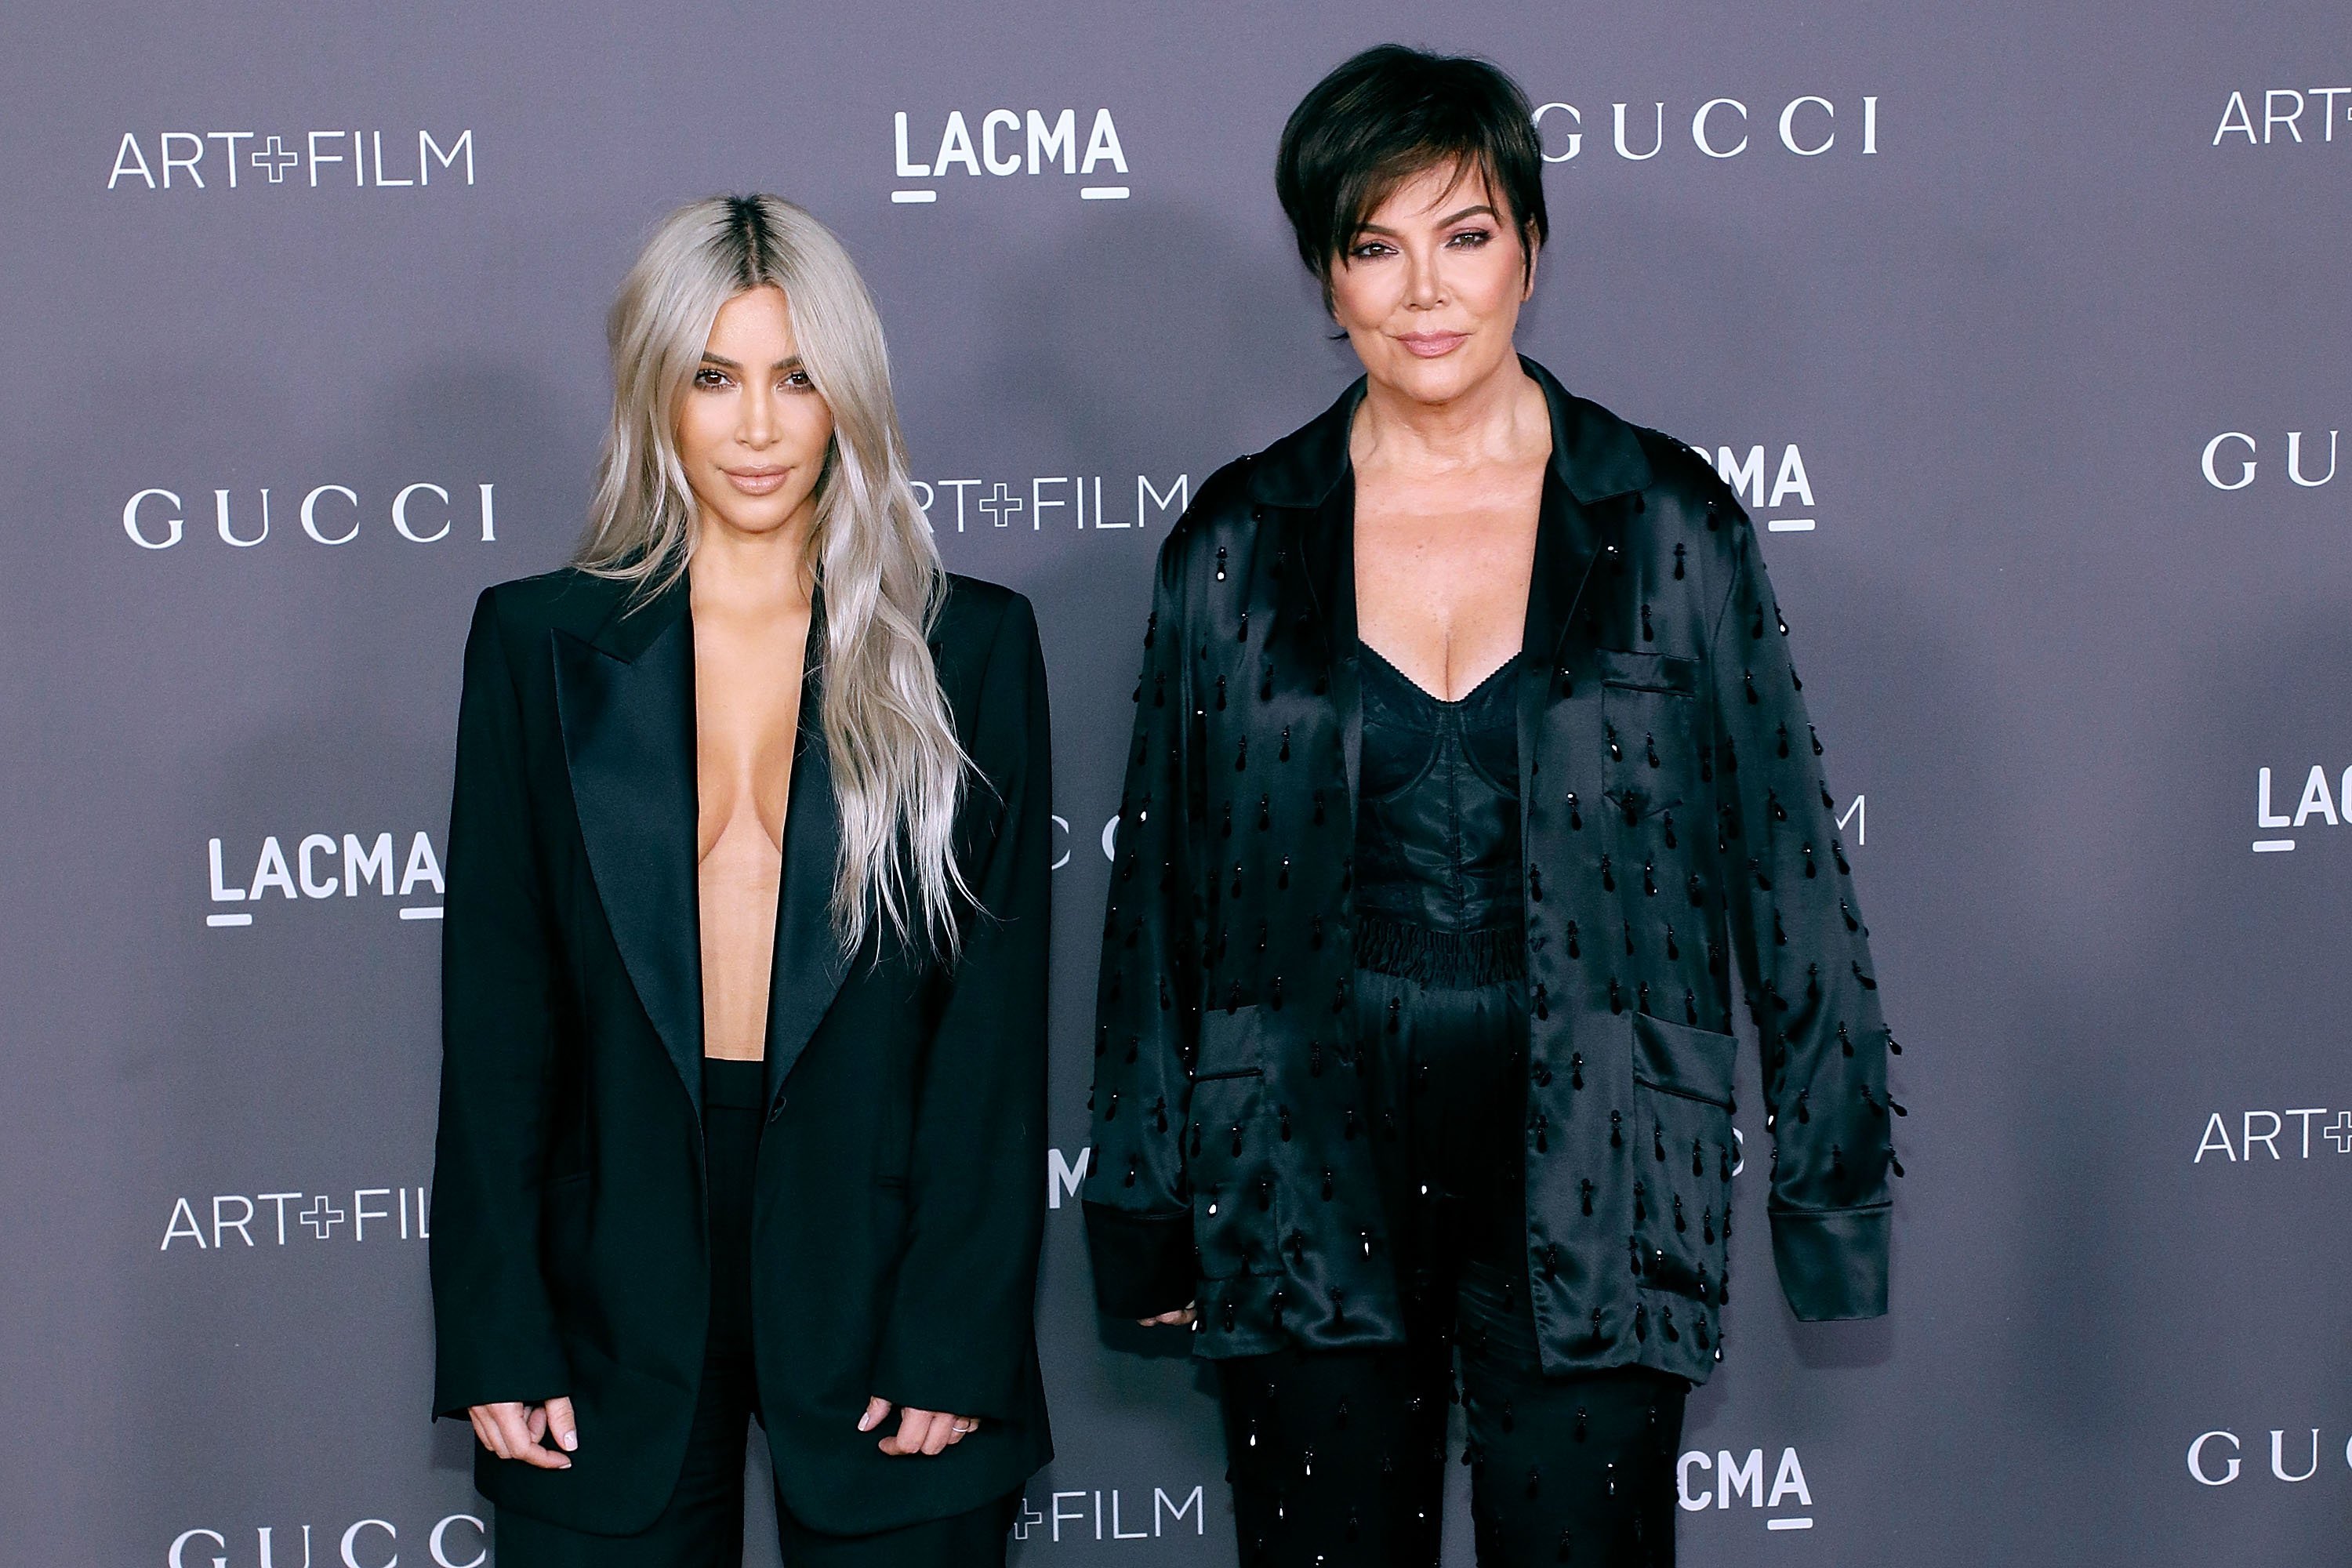 Kim Kardashian West and Kris Jenner attend the 2017 LACMA Art + Film Gala in Los Angeles, California on November 4, 2017 | Photo: Getty Images